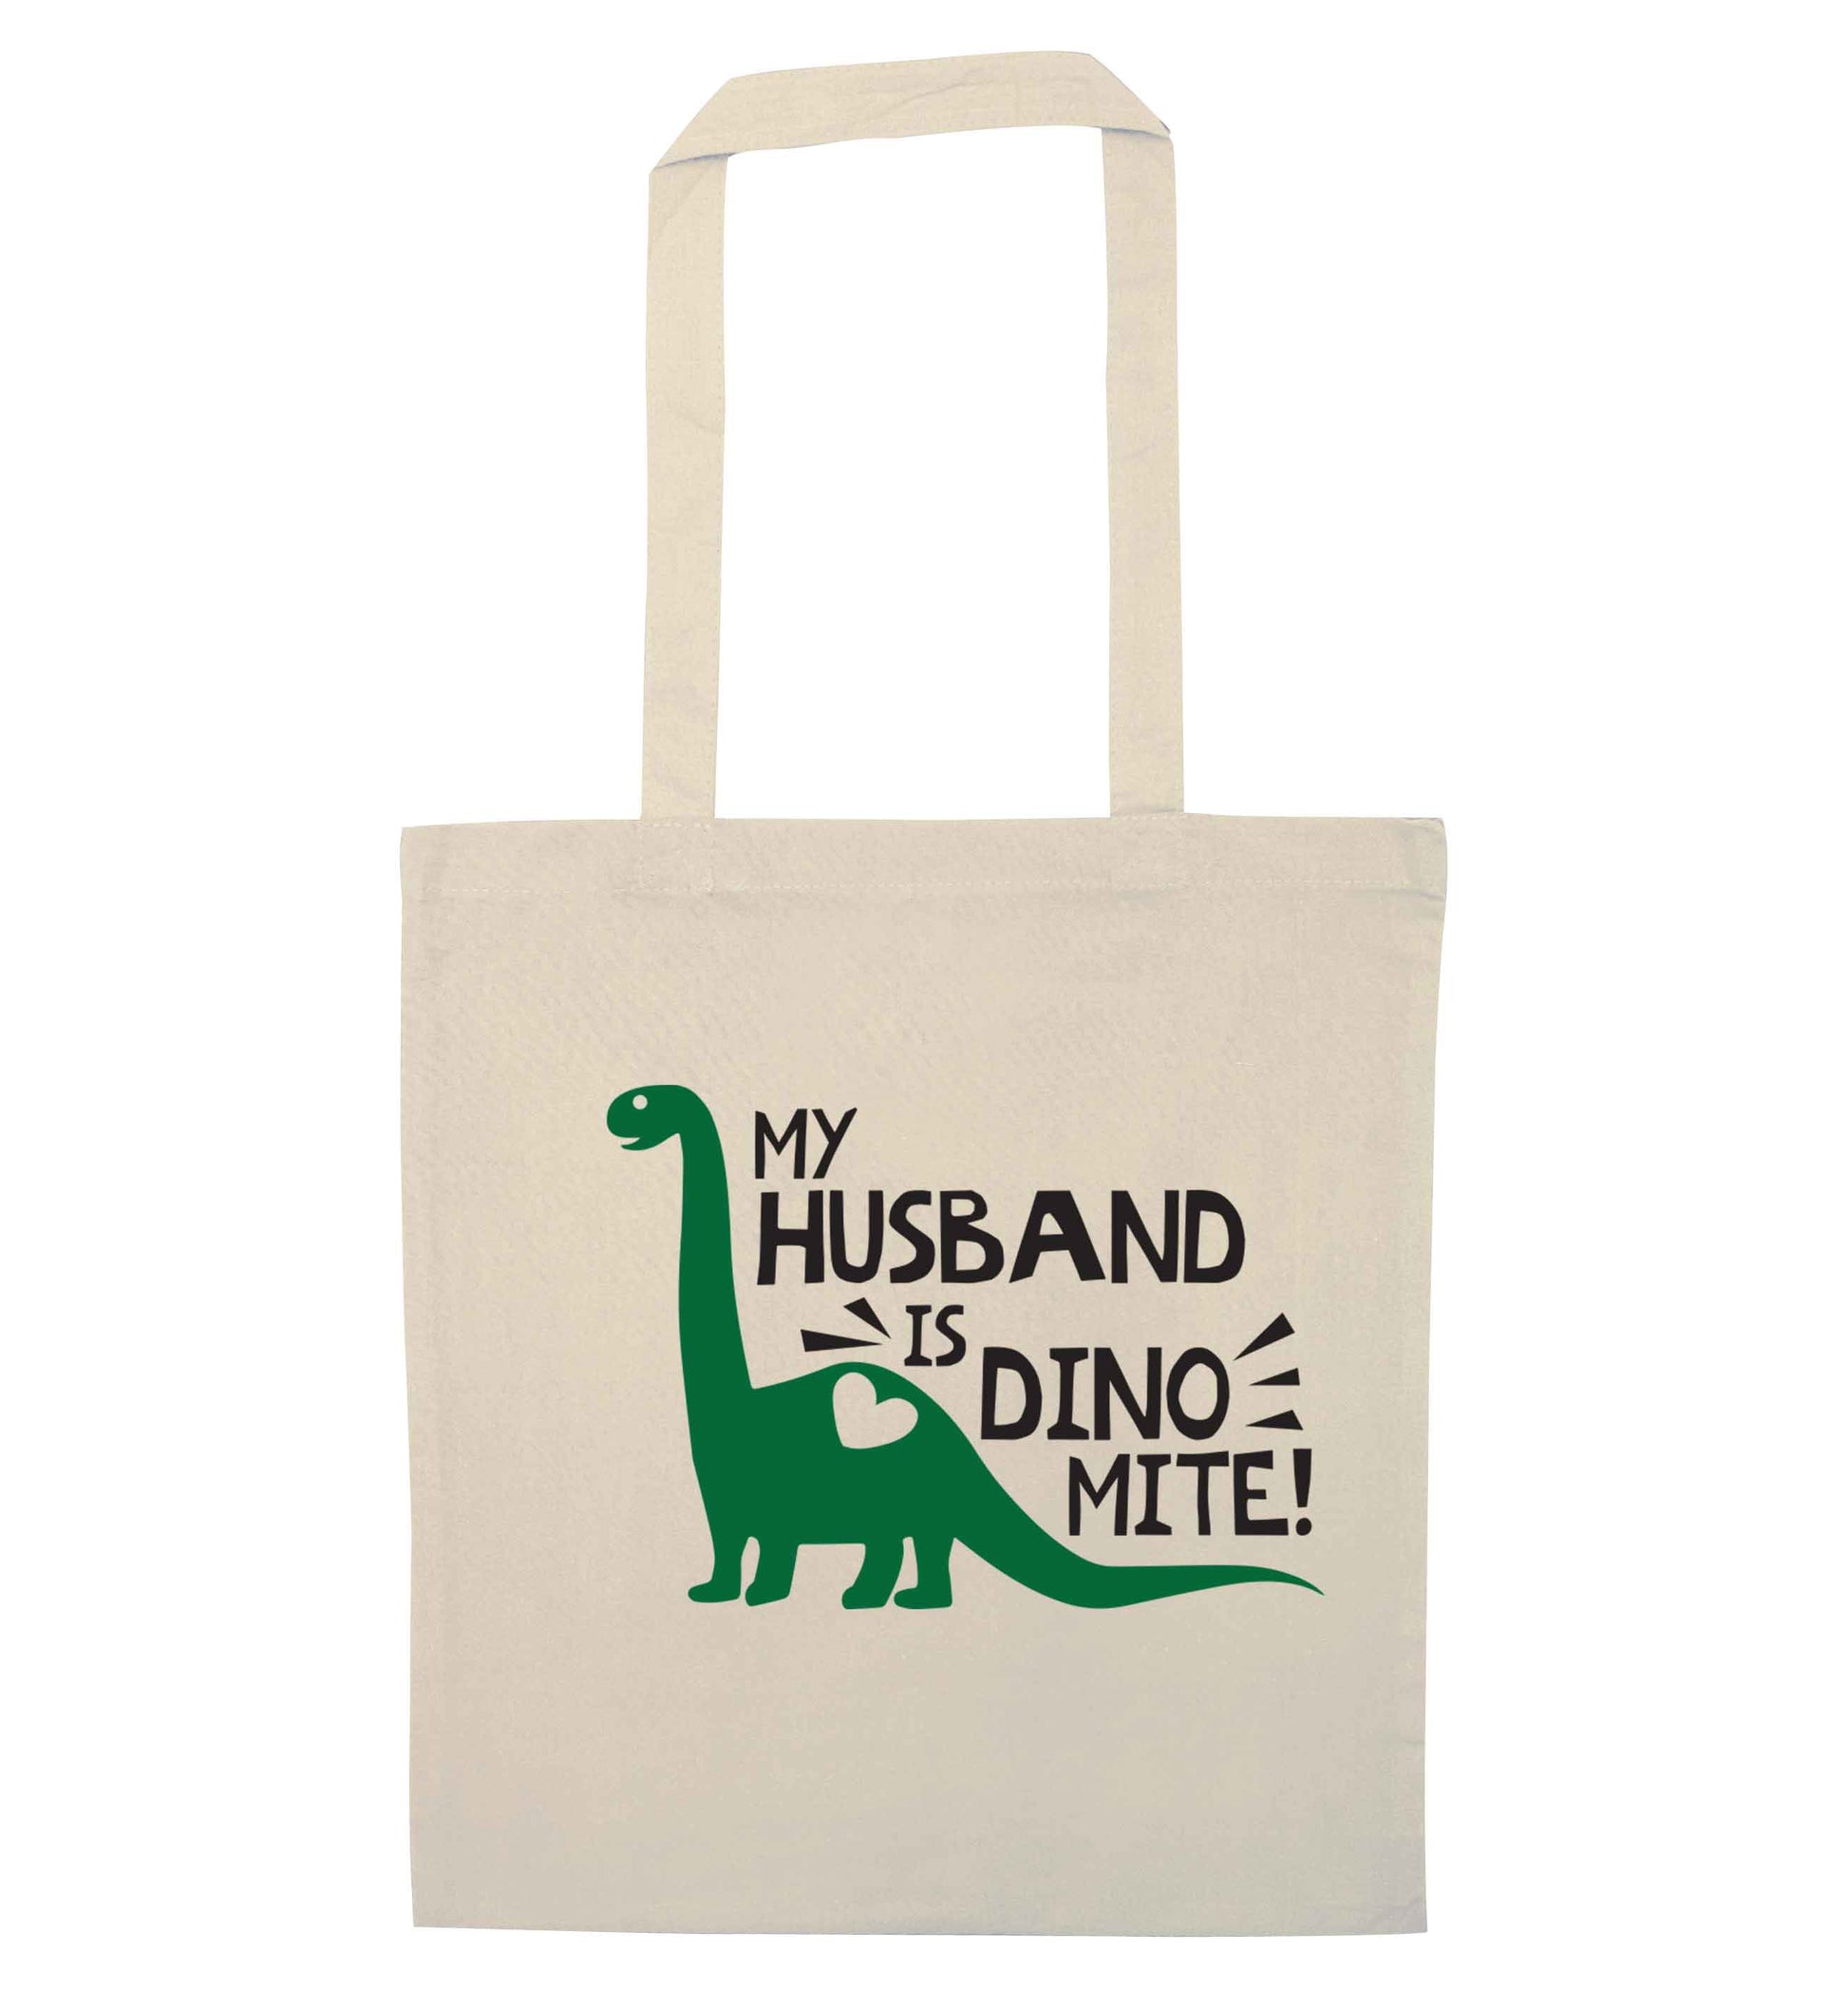 My husband is dinomite! natural tote bag